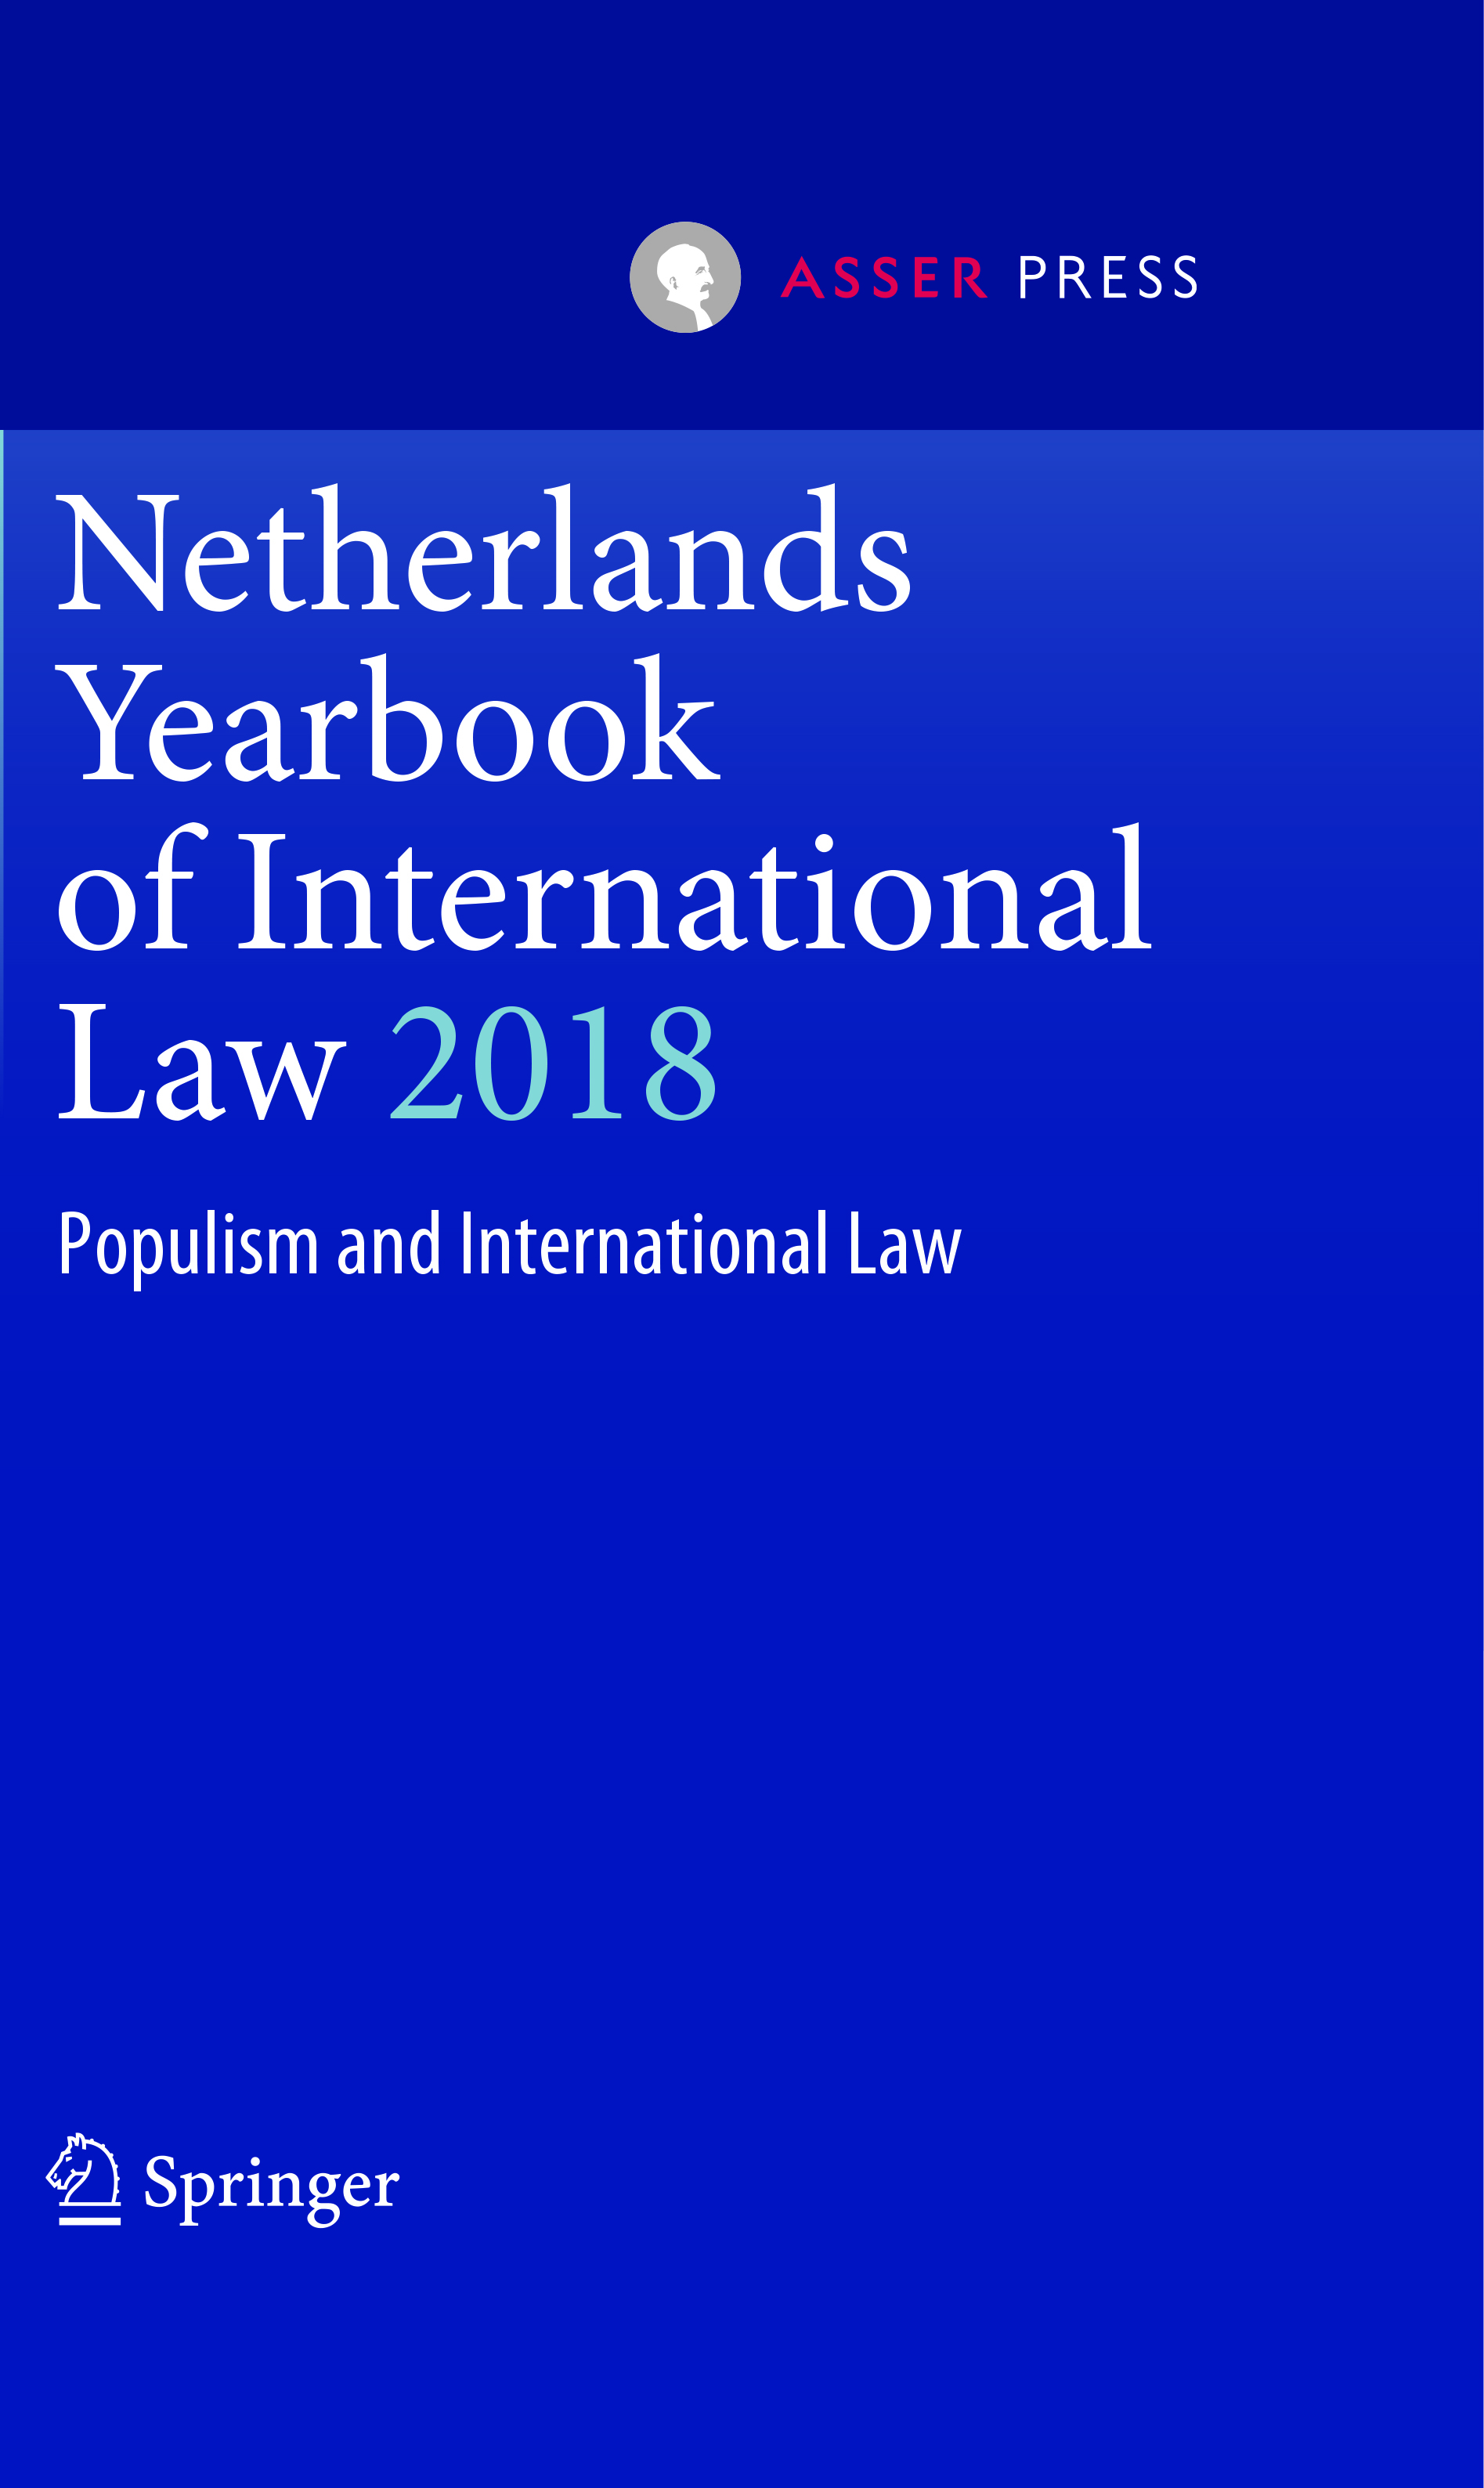 Netherlands Yearbook of International Law 2018, Volume 49 - Populism and International Law